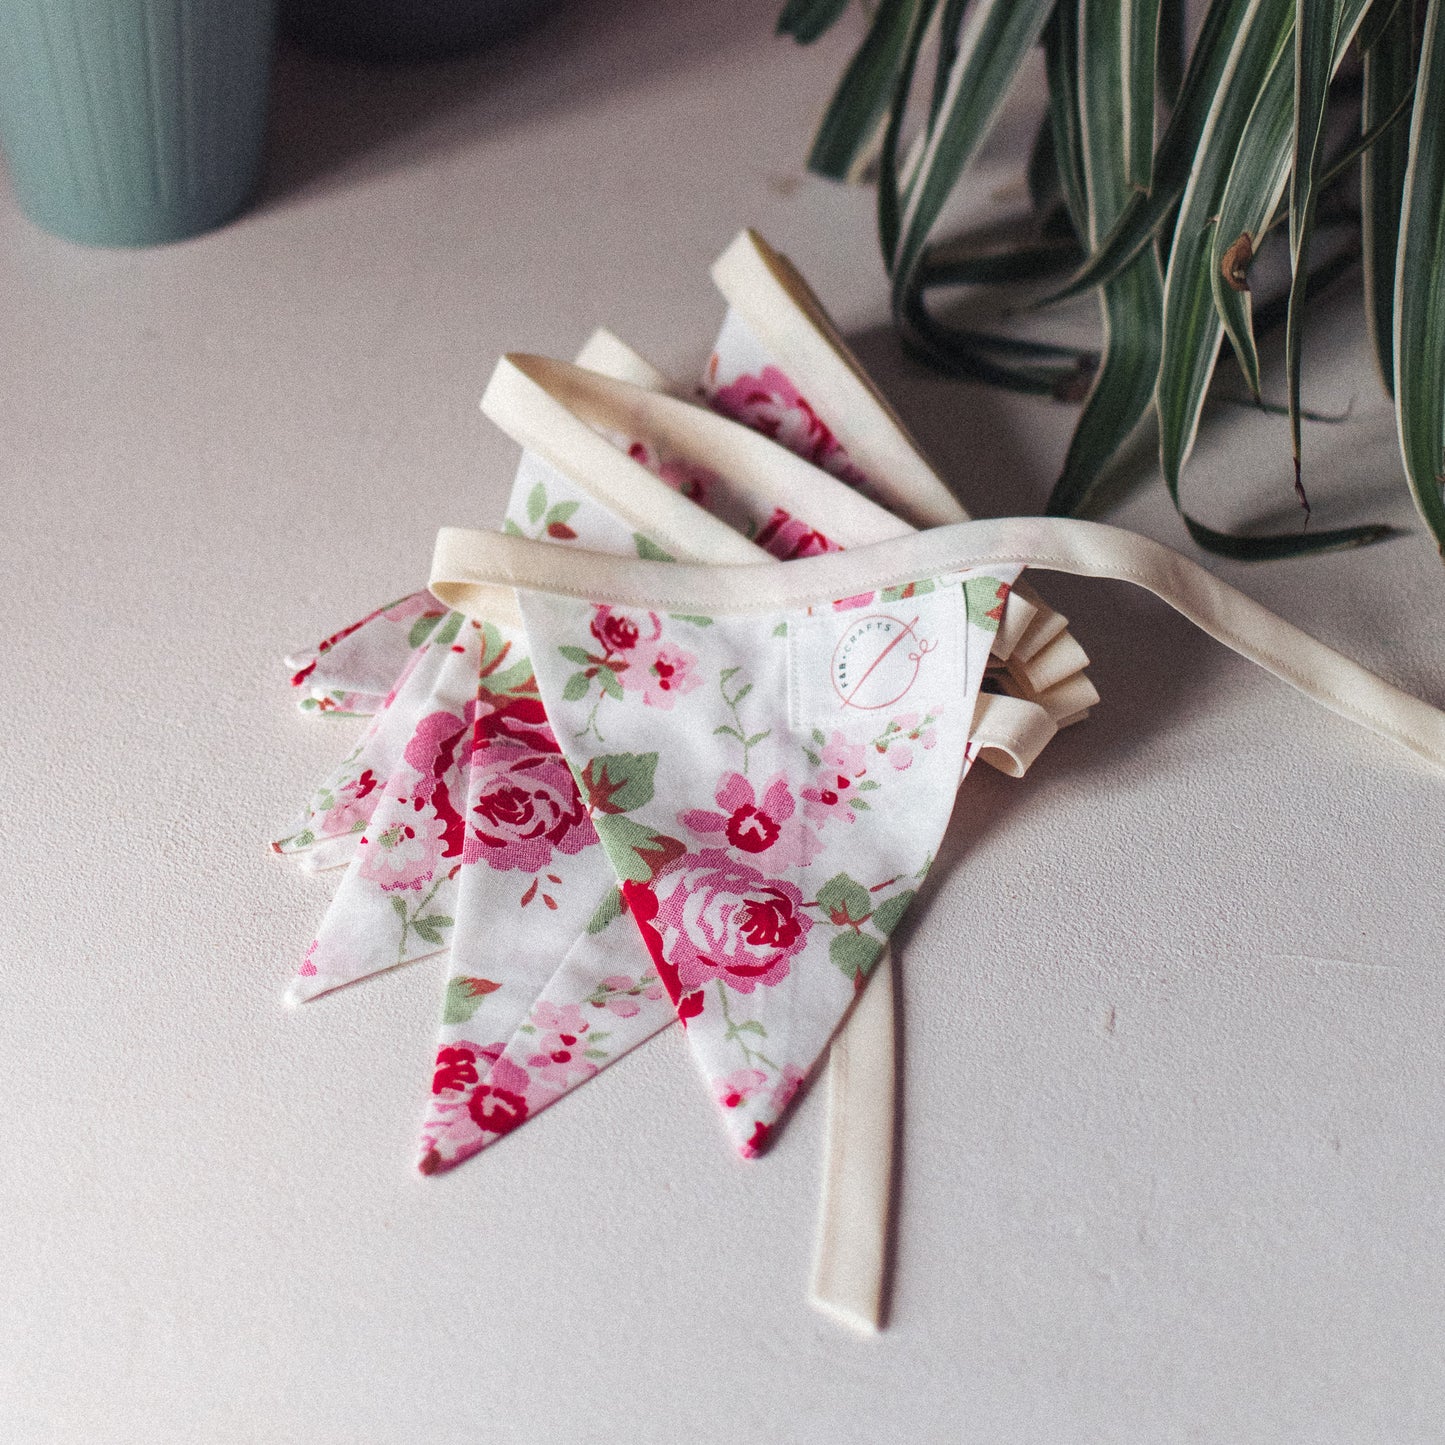 Exquisite Rosali Vintage Style Cath Kidston Bunting, perfect for weddings, parties, or elegant room decor